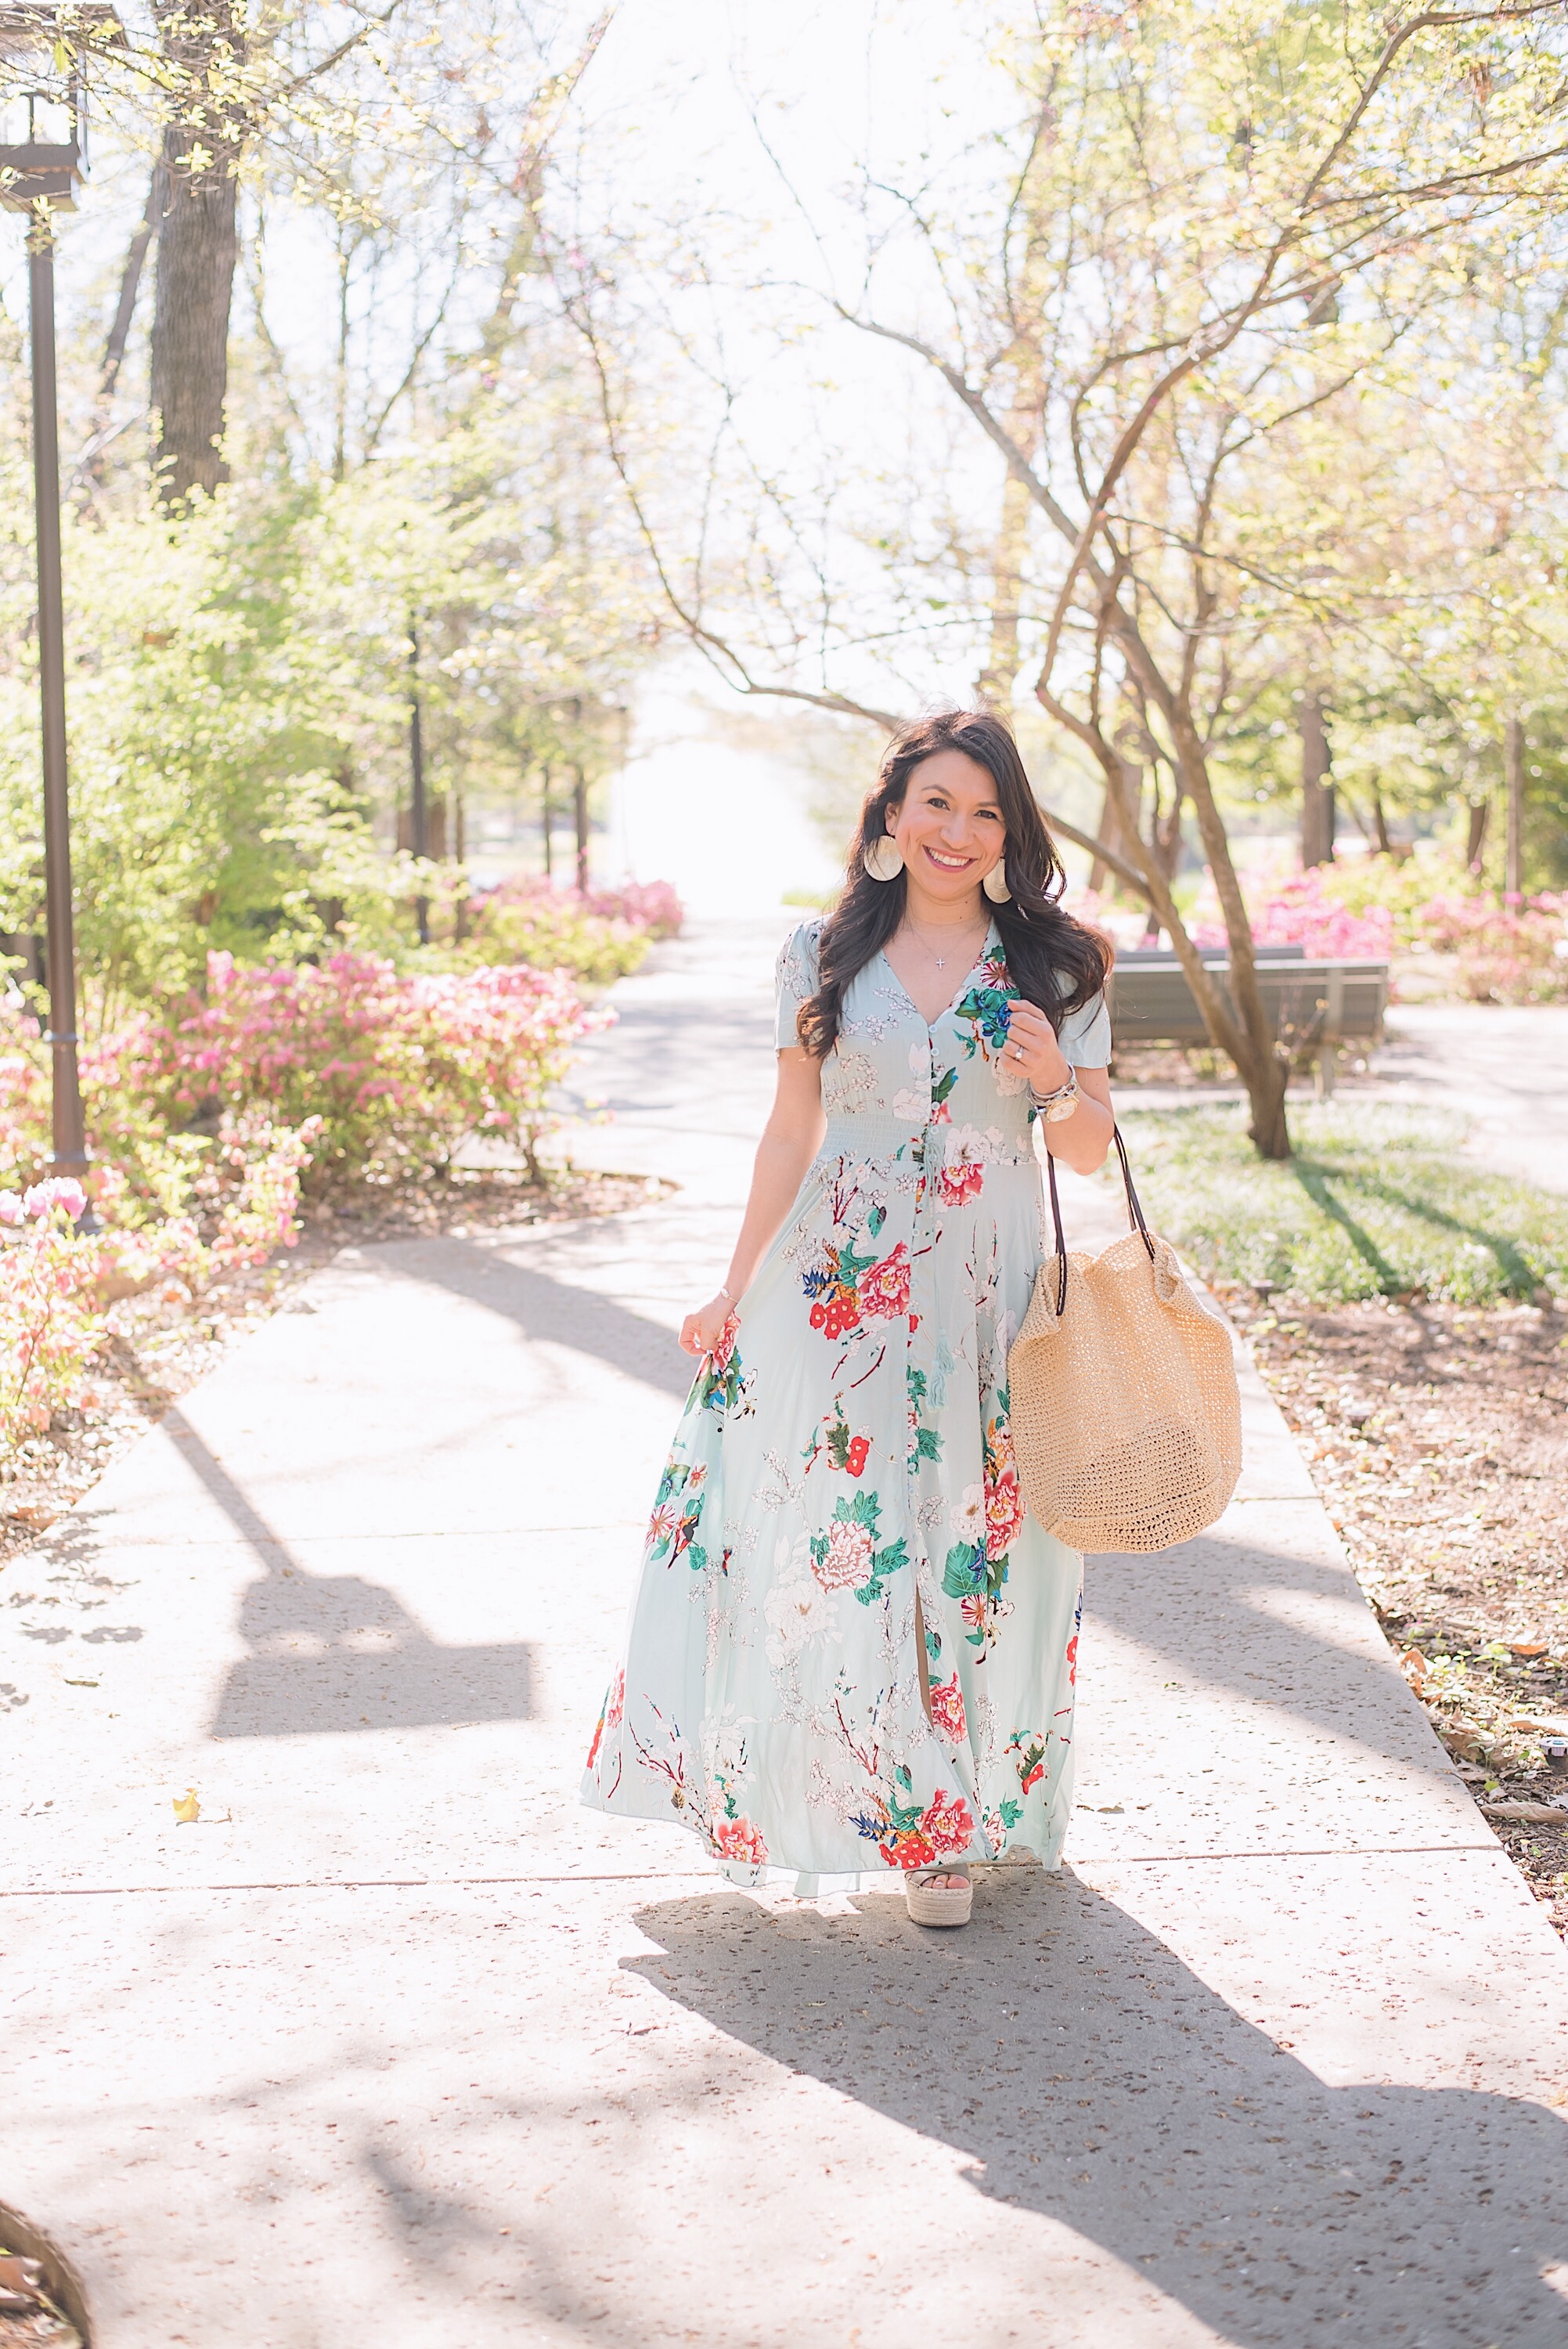 The cutest Easter dress that's comfy and wearable for any day. // Photo by Tiffany Harston Photography - Atascocita family photographer, Eagle Springs photographer